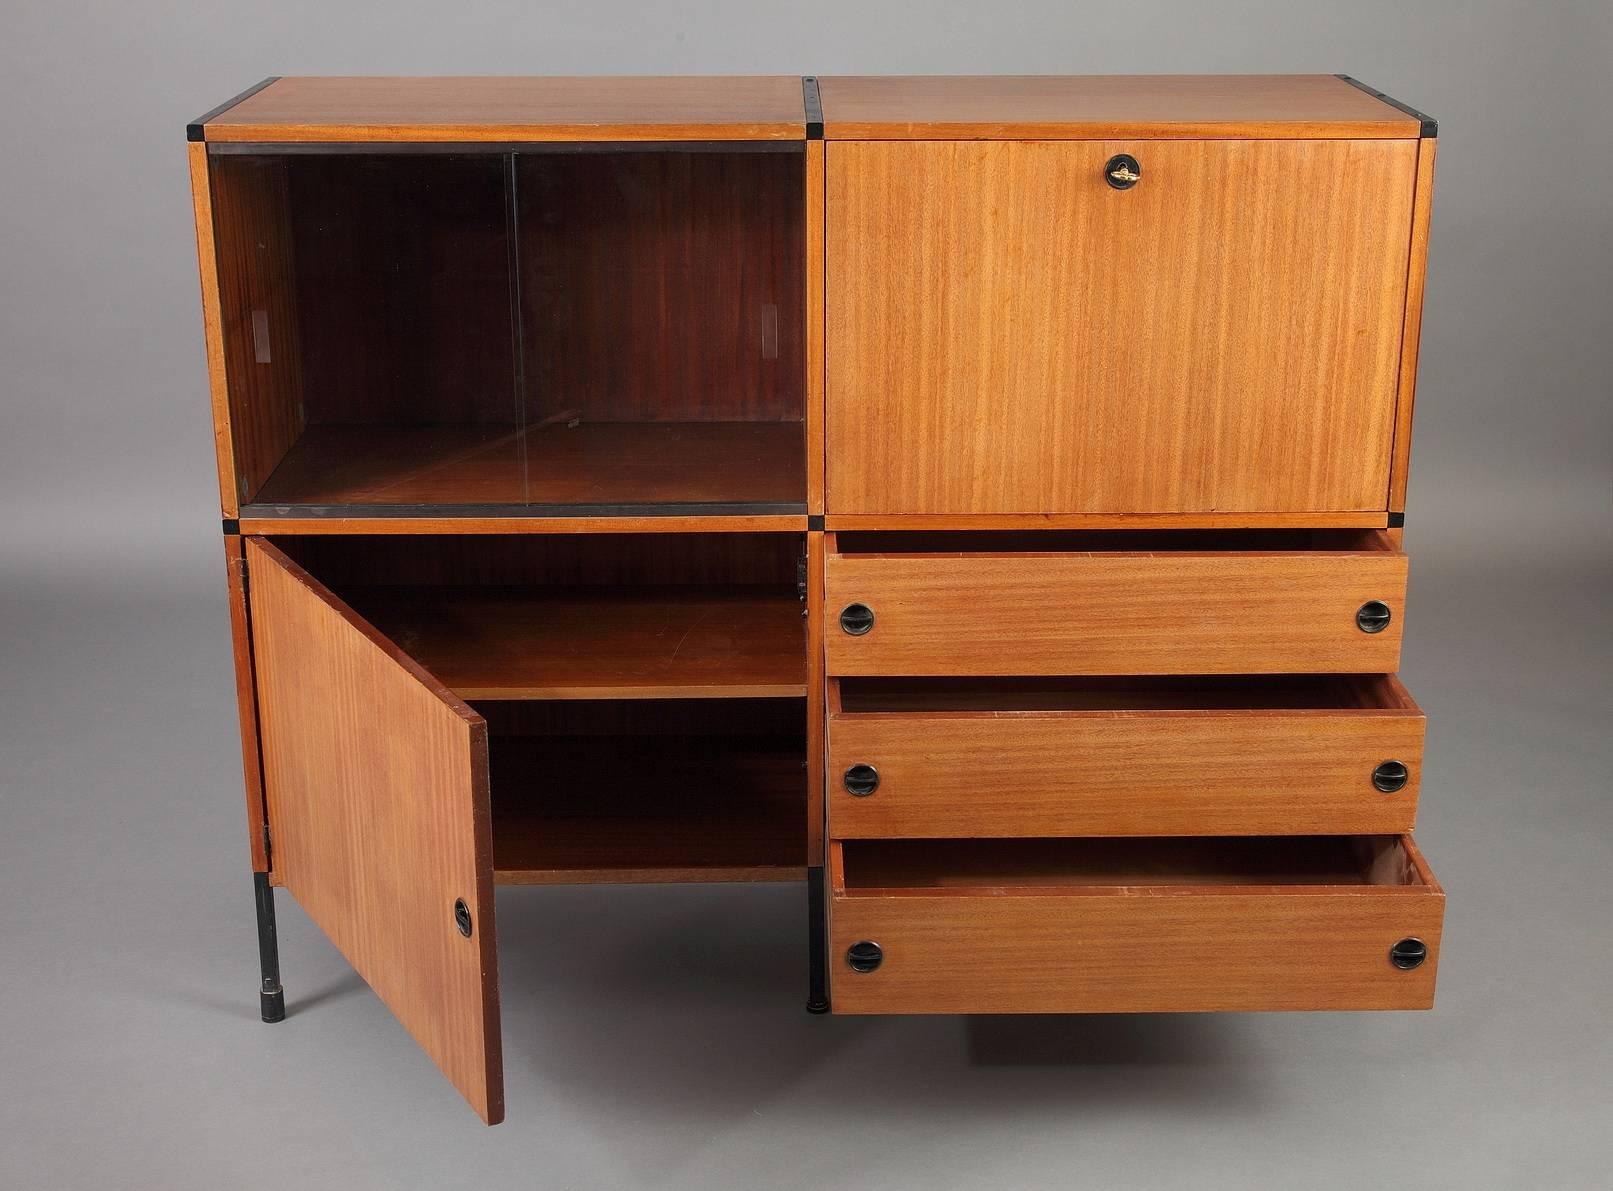 Modular teak buffet with three drawers and three containers, one with glass sliding doors, and two others with wood doors and one shelve inside. Designed during the 1950s by ARP (Atelier de Recherches Plastiques) a group composed of three designers: